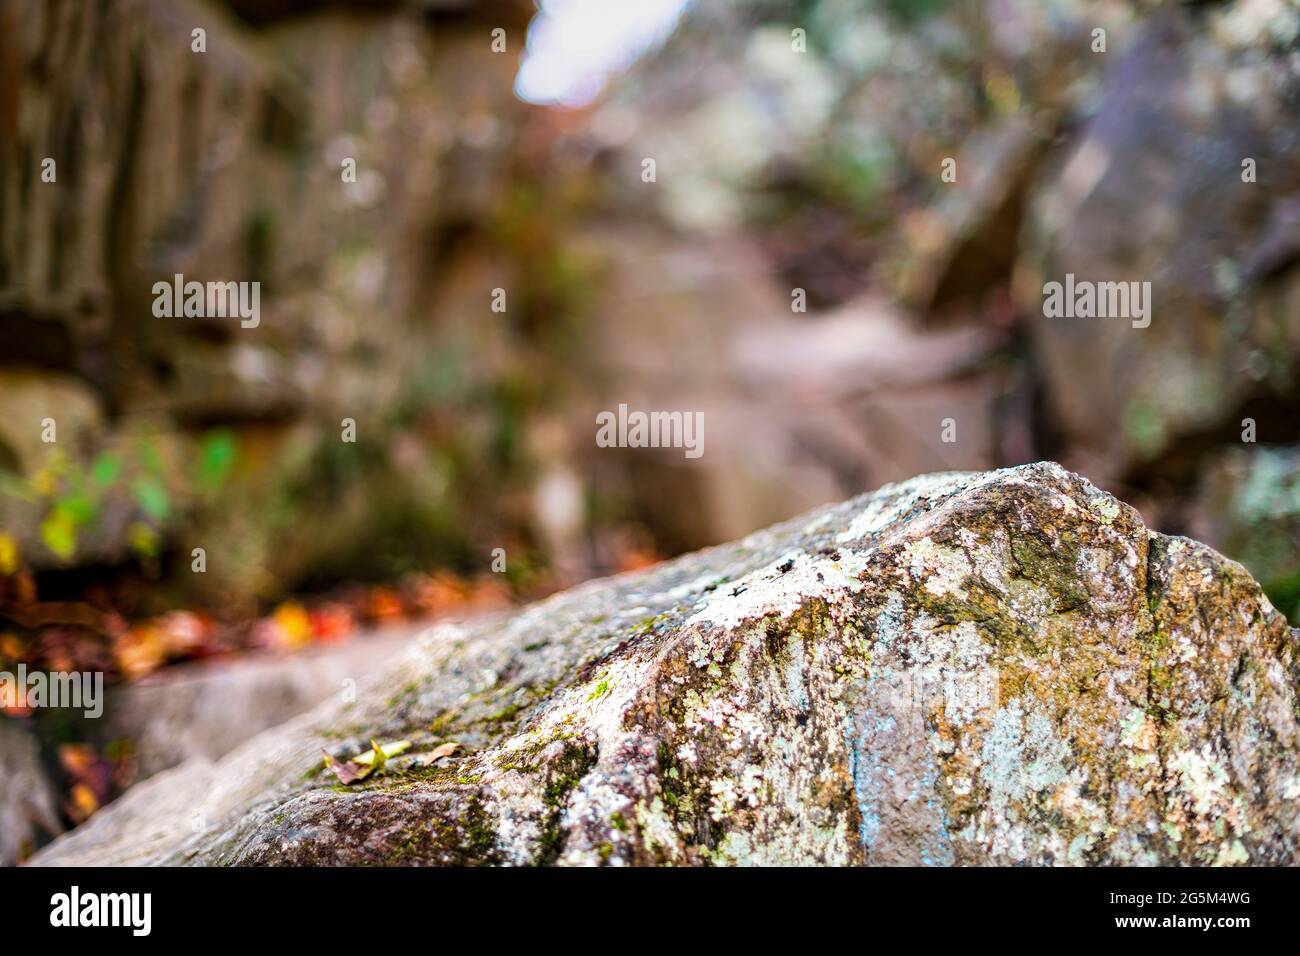 Closeup of rock covered in lichen moss in Great Falls national park by Billy Goat hiking trail in Maryland with autumn foliage in blurry background Stock Photo